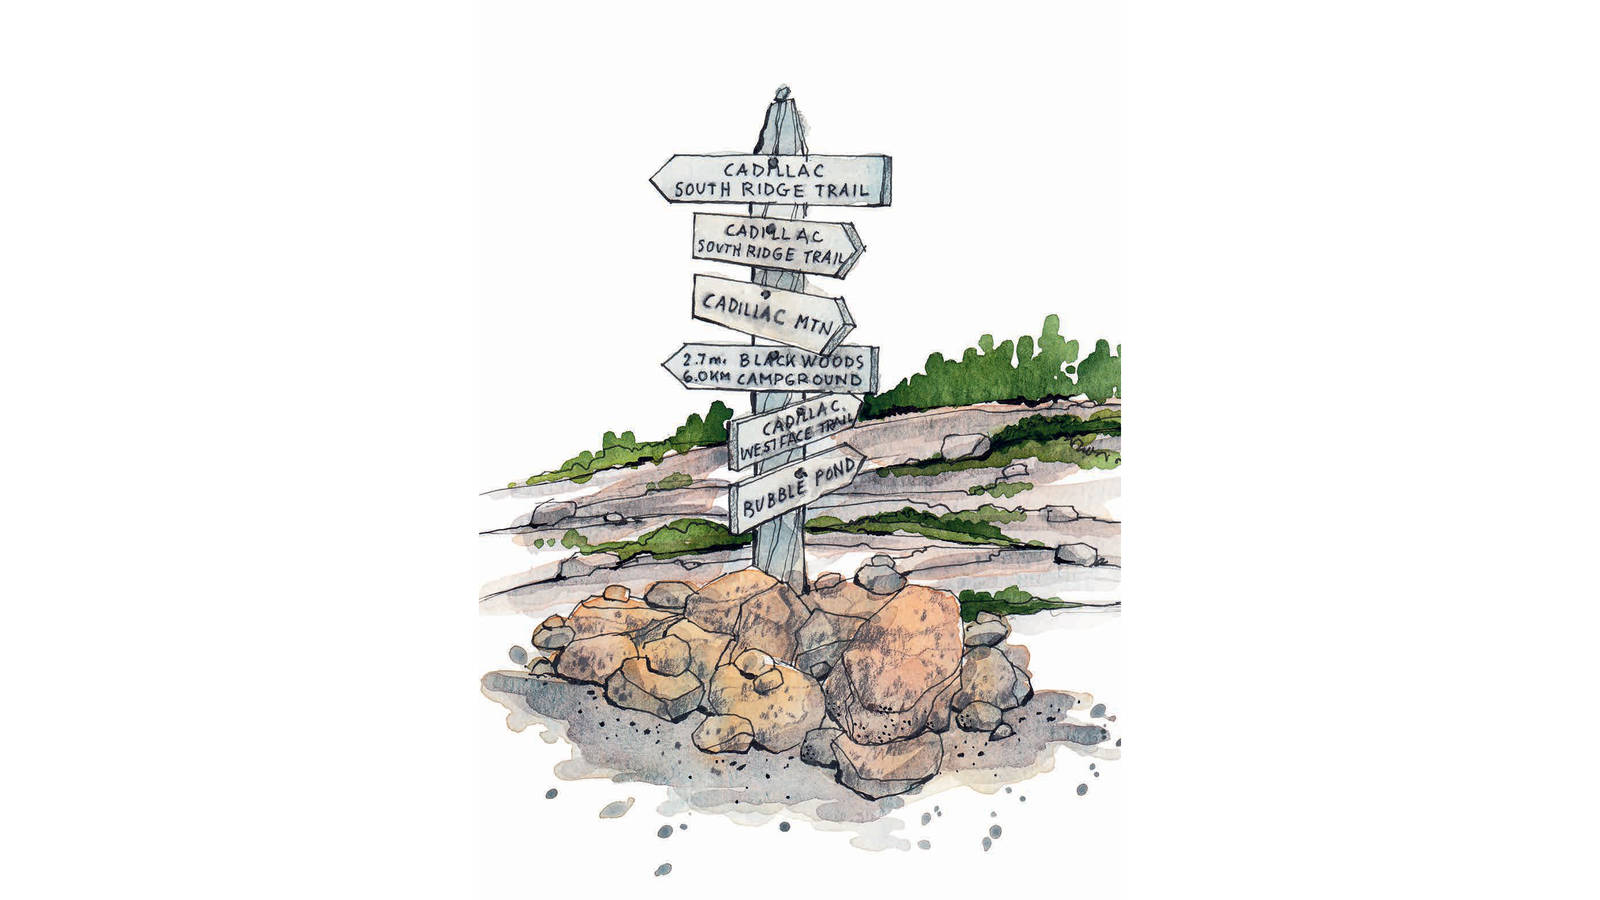 <h3 style="text-align: center; padding: 50px;"><span class="text-Intro-style">Acadia boasts more than 125 miles of hiking trails. Here: A wooden trail sign on Cadillac Mountain.</span></h3>